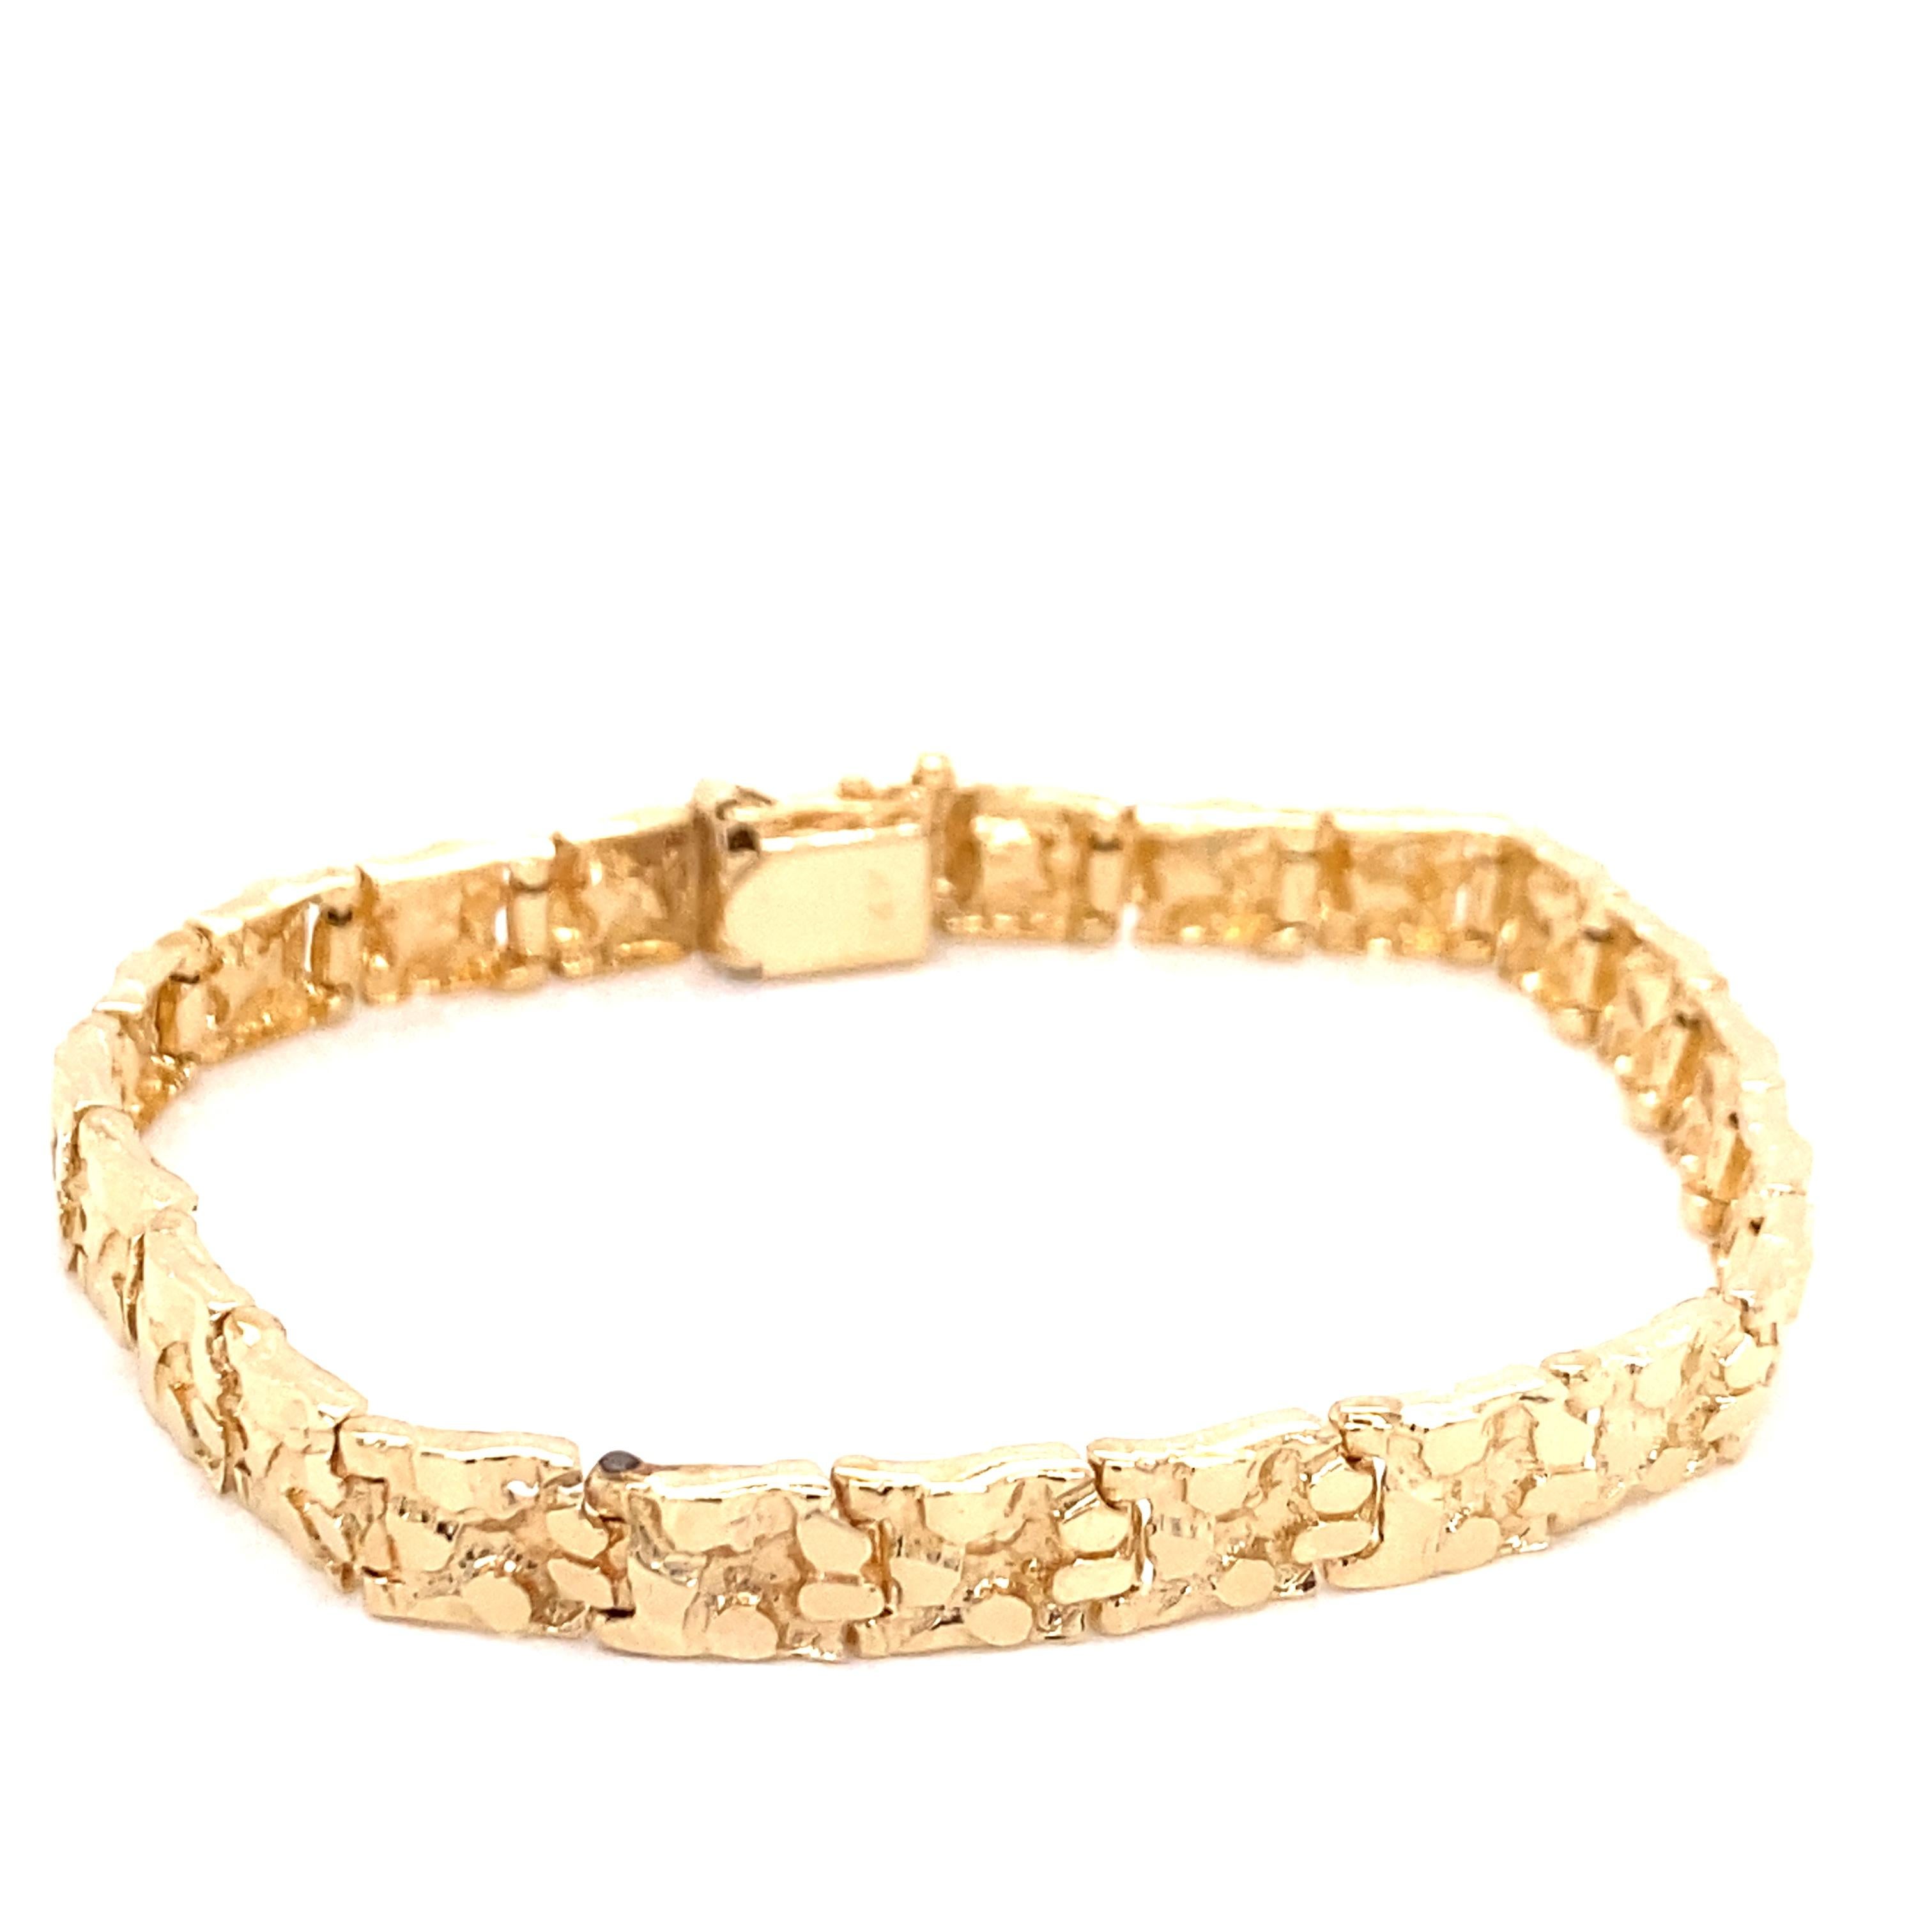 Vintage 1970's 14K Yellow Gold Nugget Bracelet - The bracelet measures .25 inches wide and 7.25 inches long. It has a plunger clasp with a figure 8 safety catch. The bracelet weighs 15.15 grams.